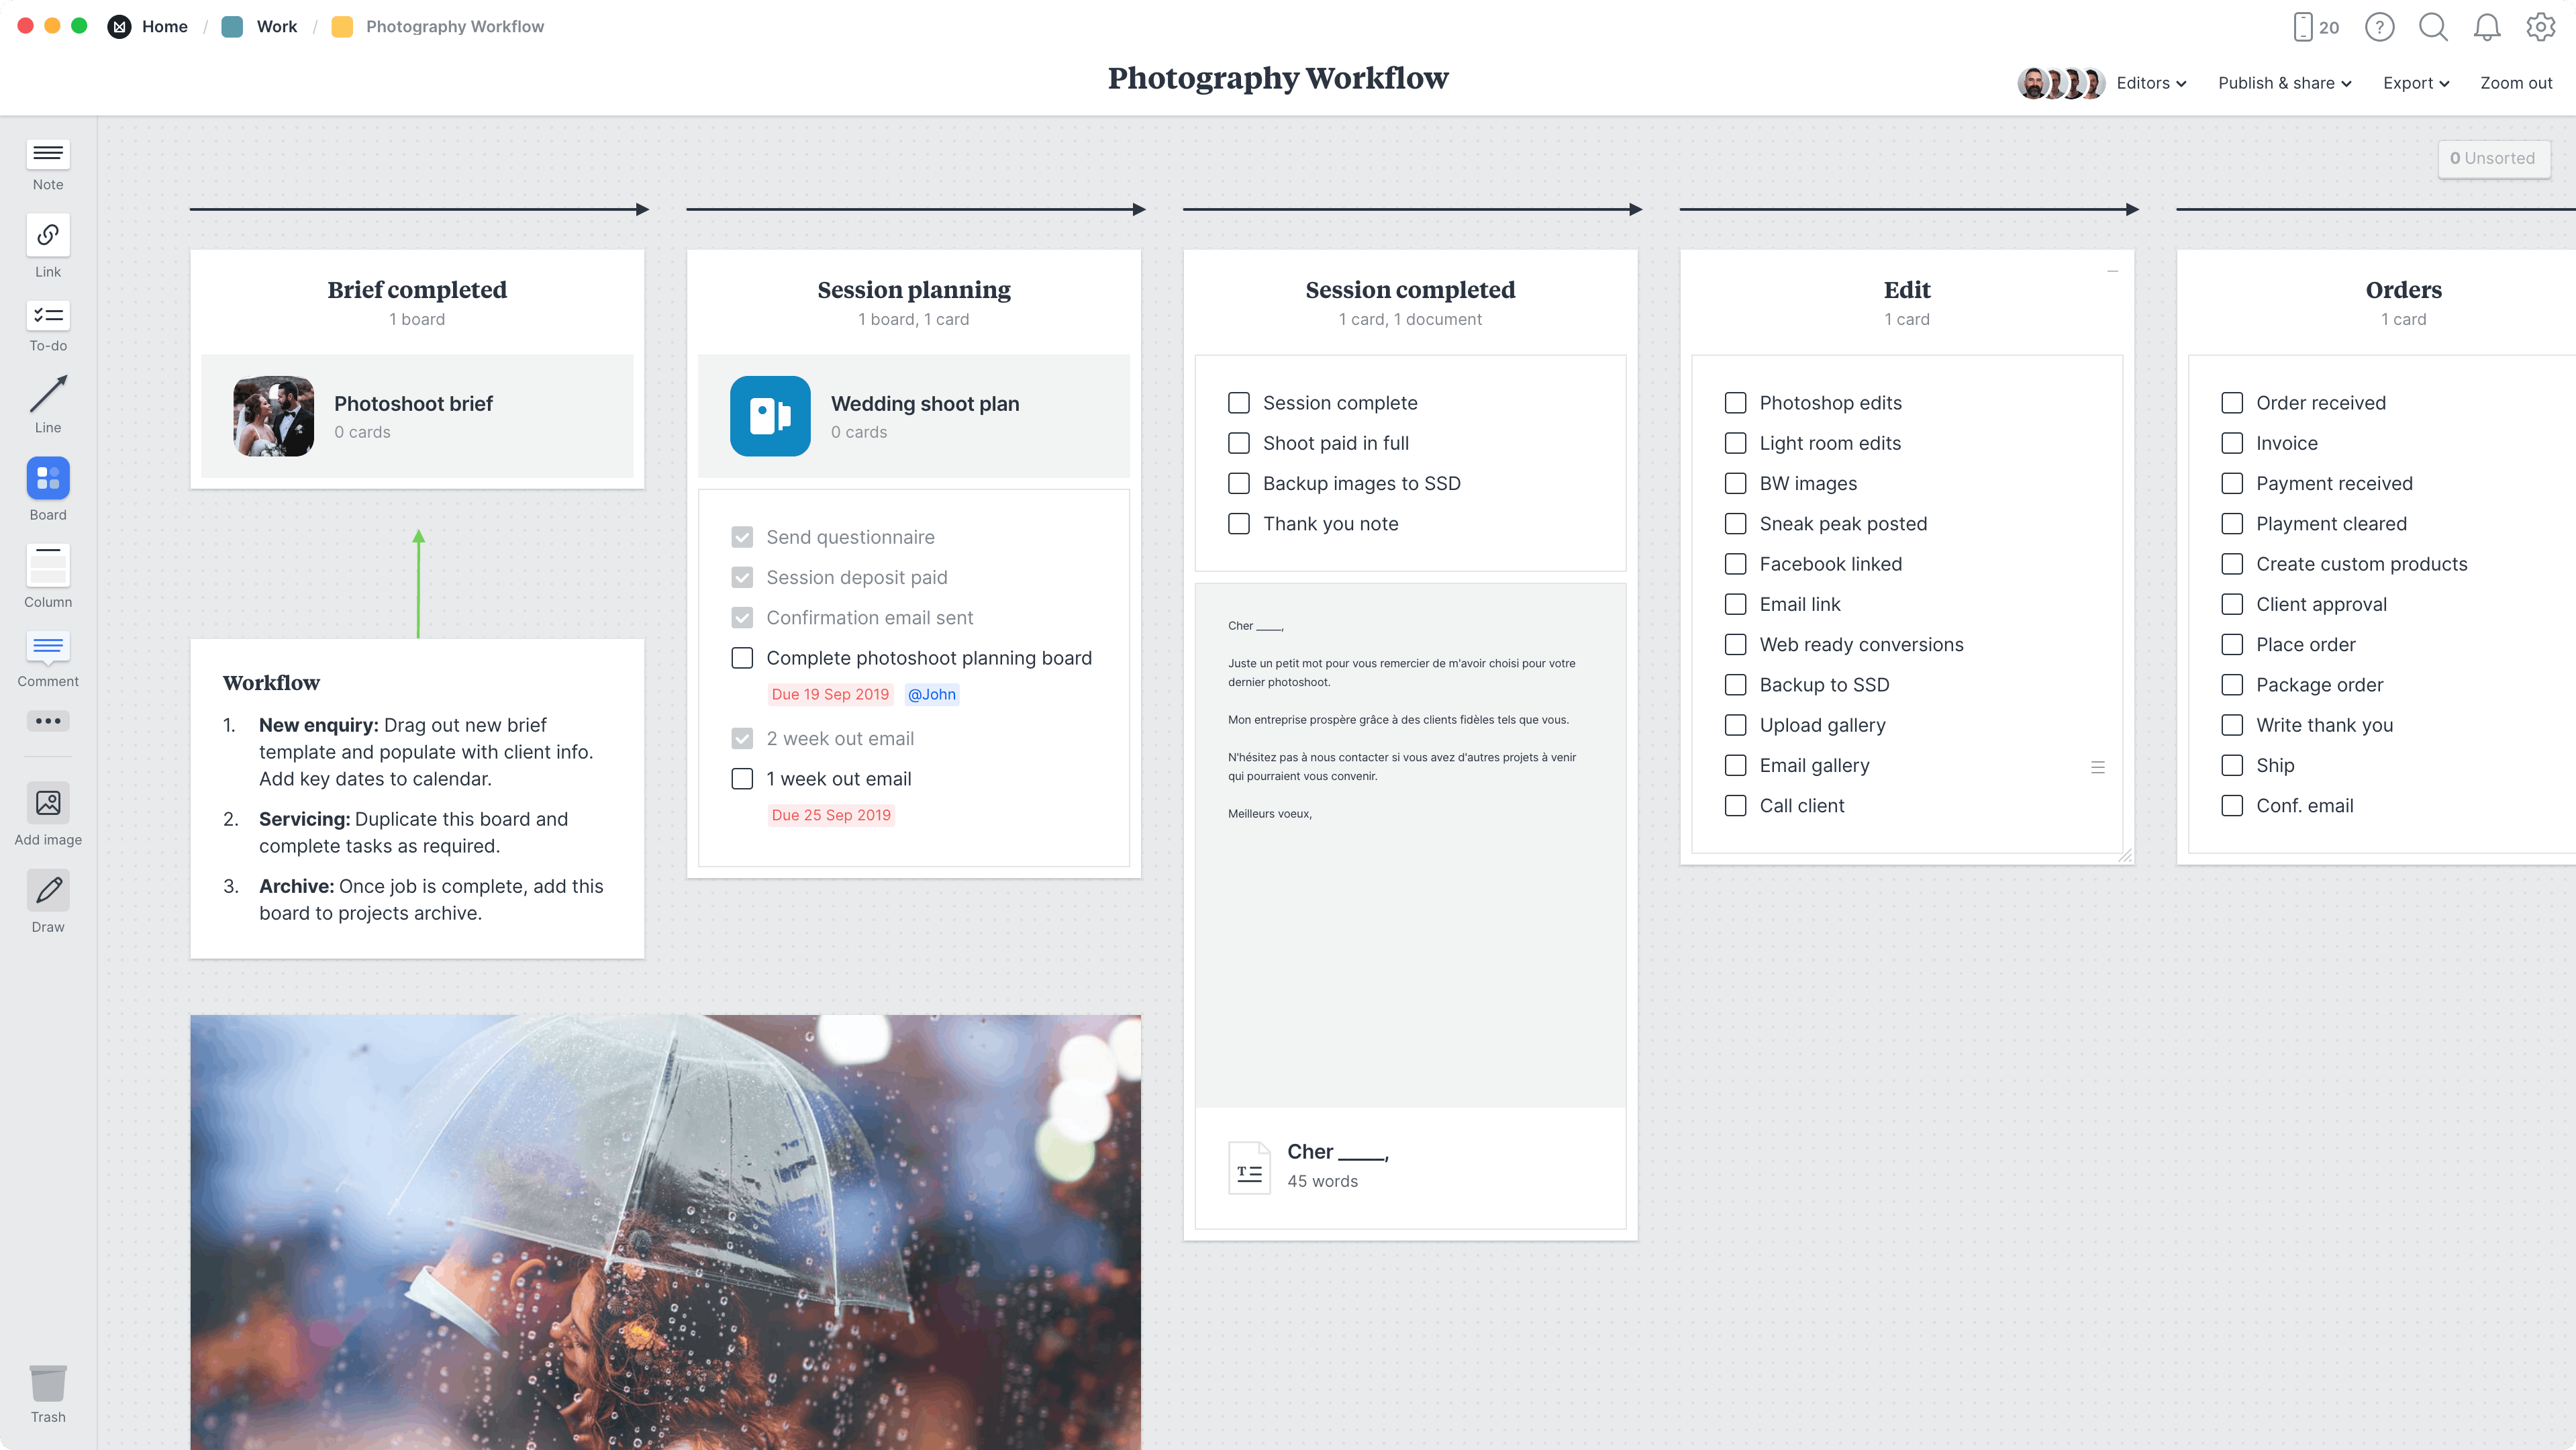 Photography Workflow Template, within the Milanote app